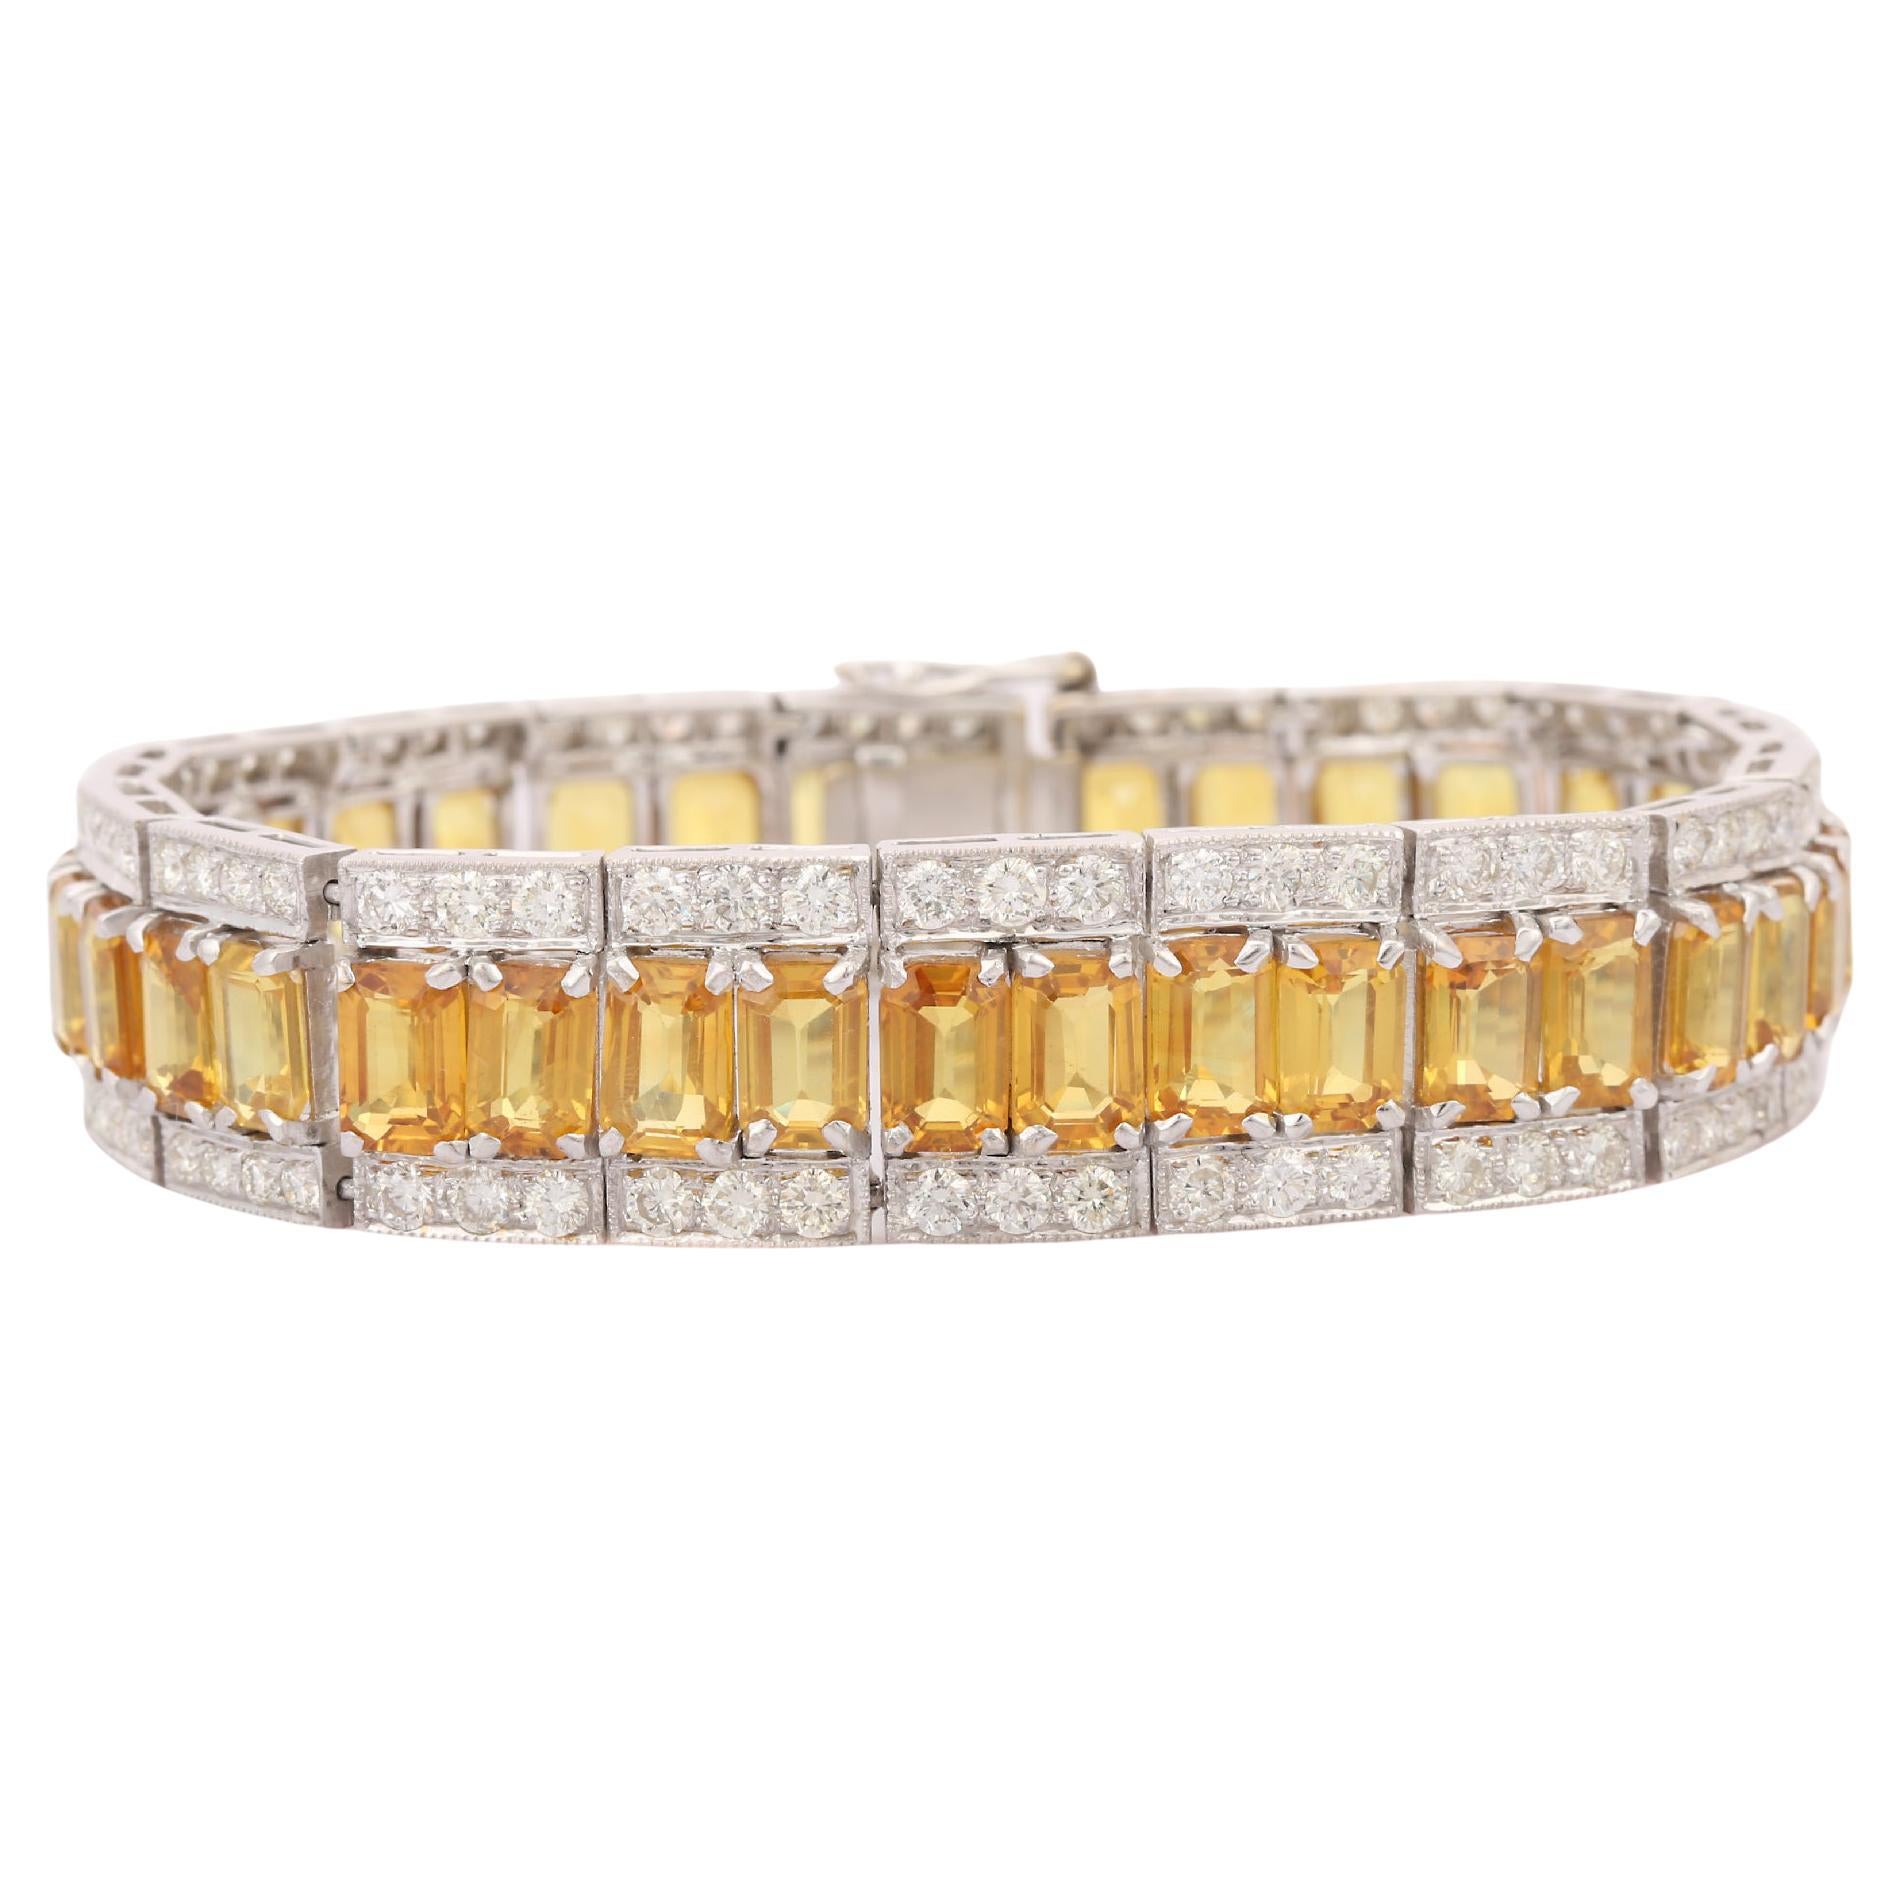 Charriol Diamond Classique Bracelet in Stainless Steel, 18k Yellow and ...